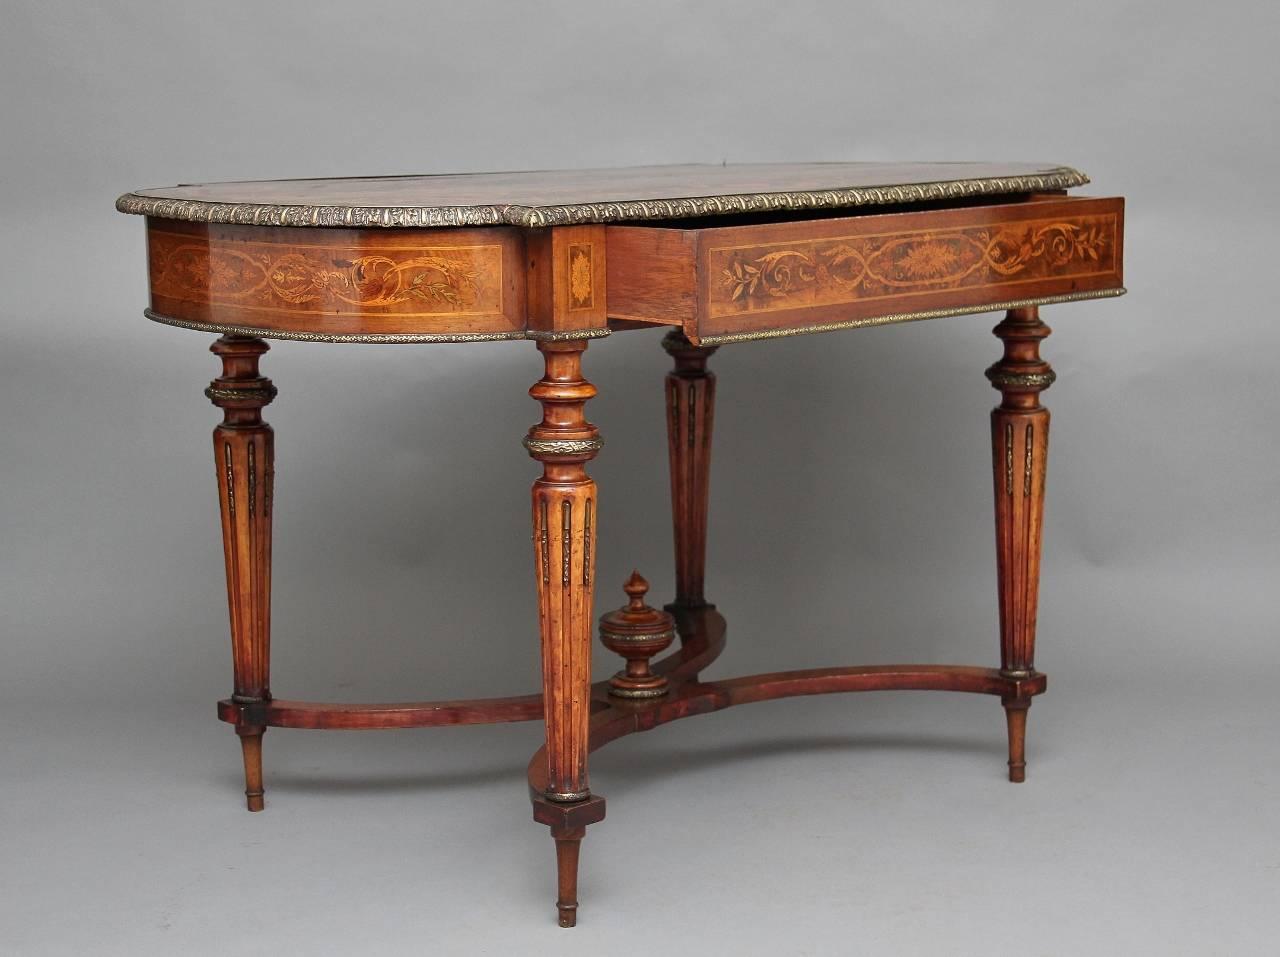 19th century French inlaid walnut center table, the shaped top profusely inlaid with floral marquetry and other designs, the top finished off with a very good quality brass moulding along the edge, with a single drawer below at the front and also